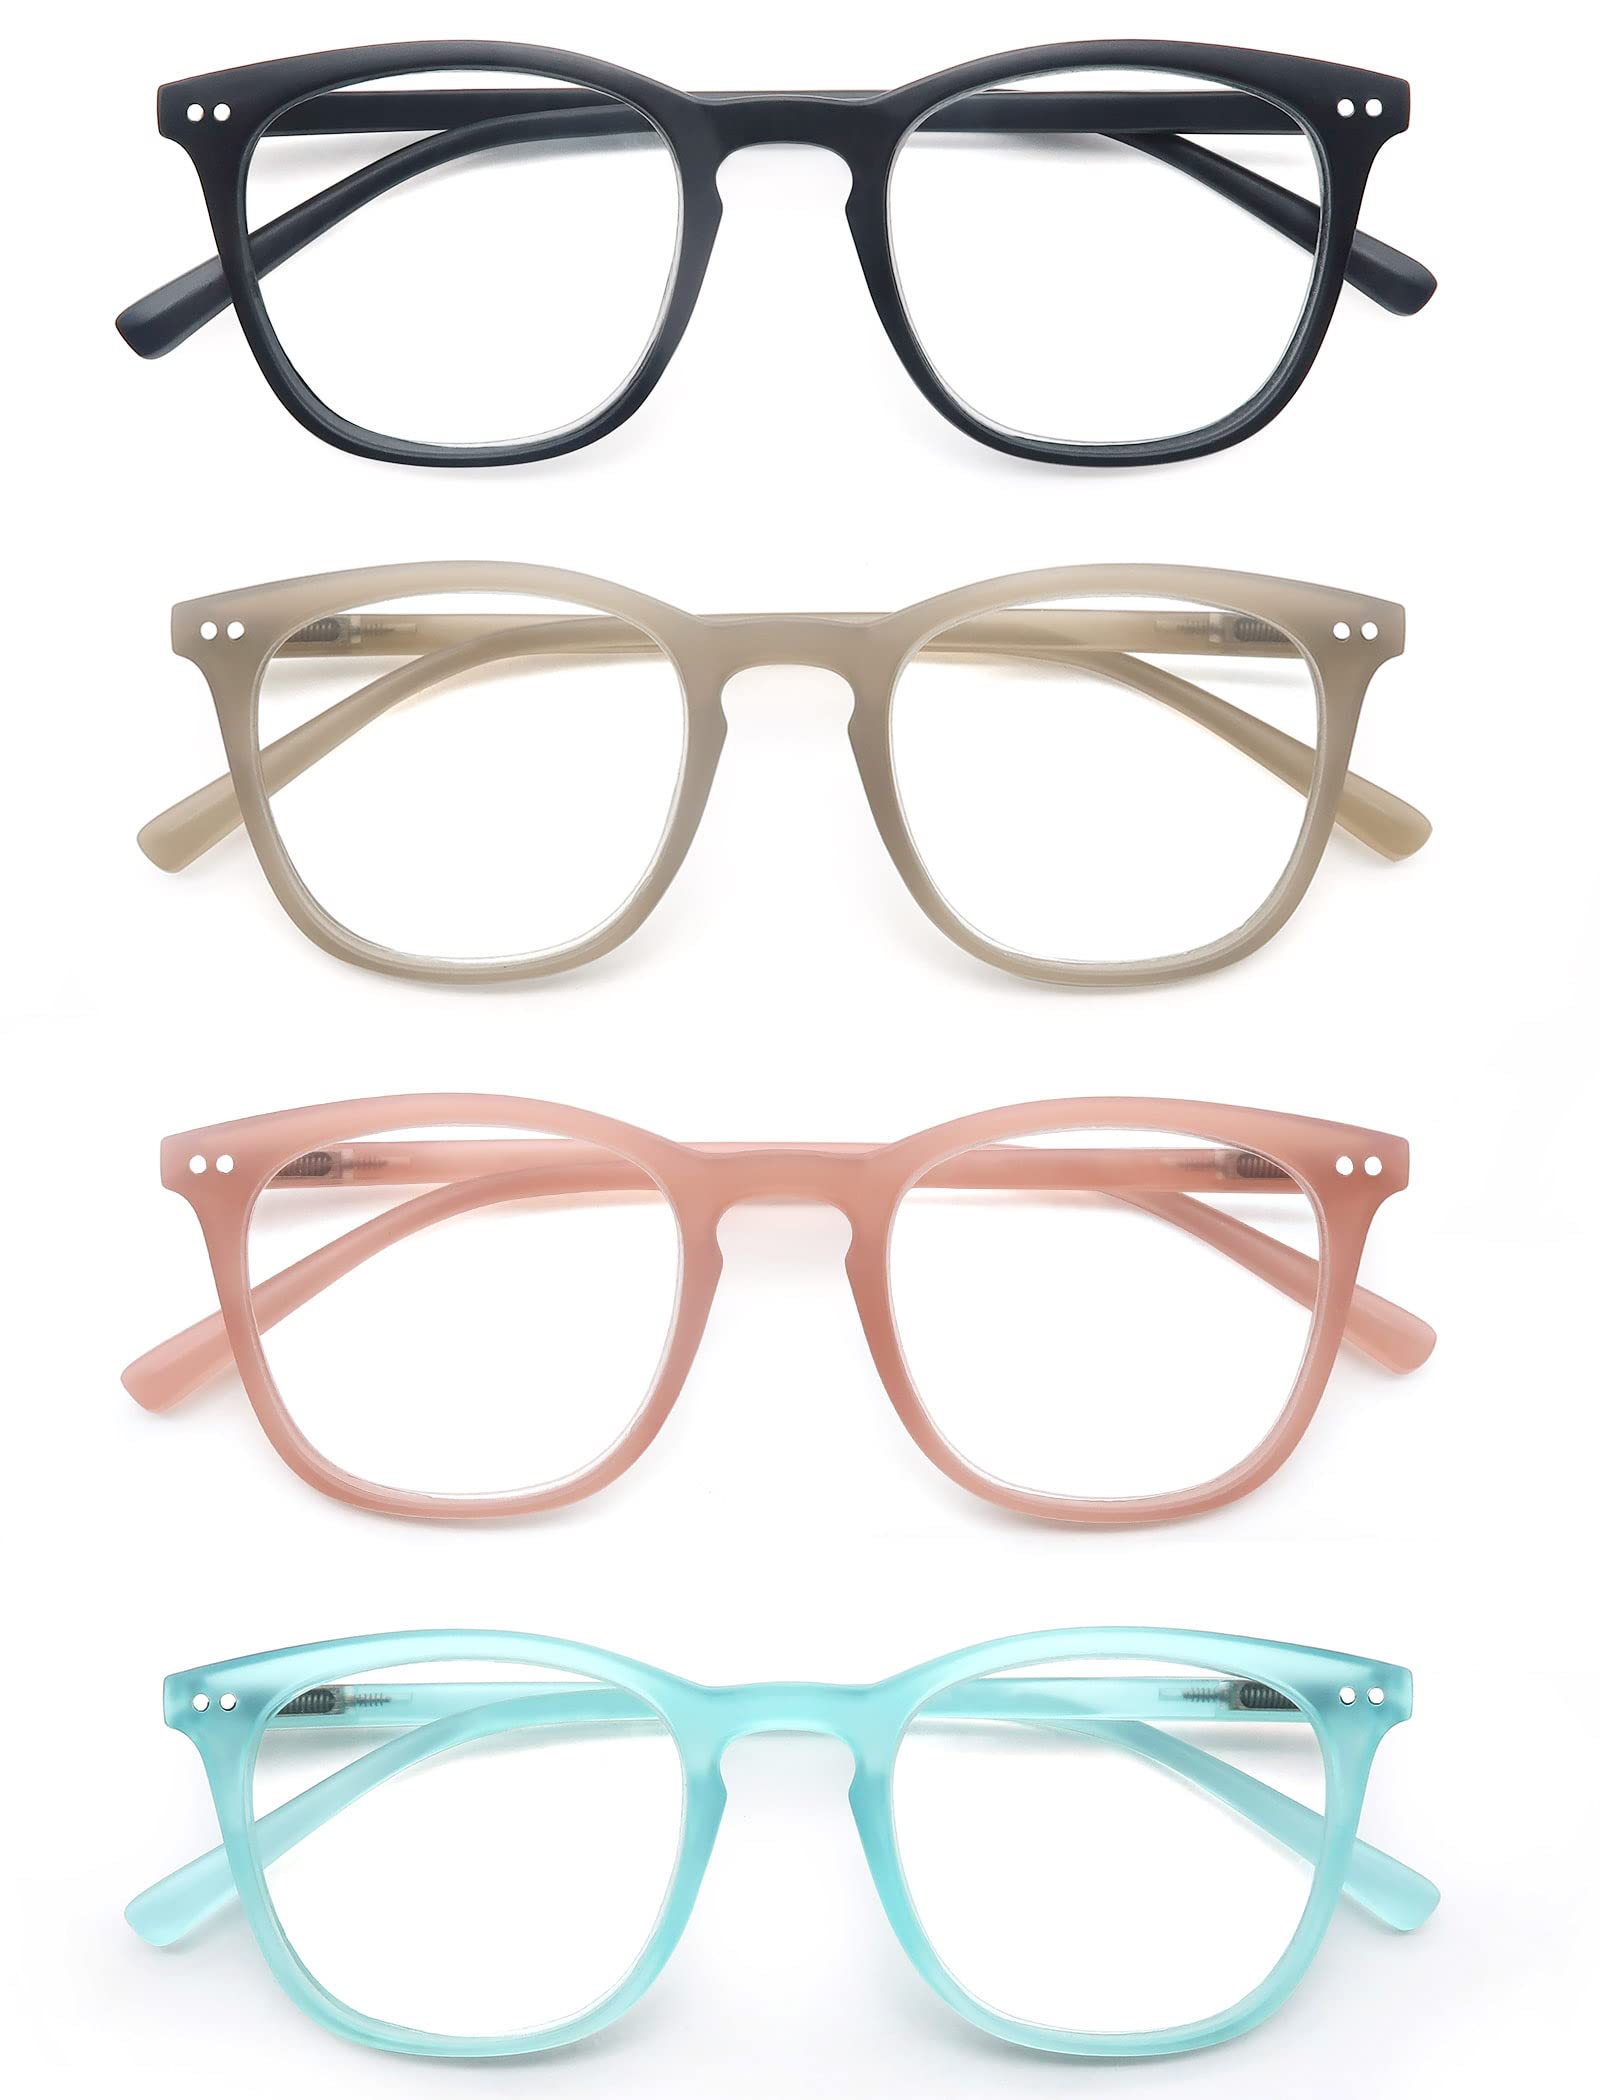 Flutter - Quality stylish reading glasses readers cheaters